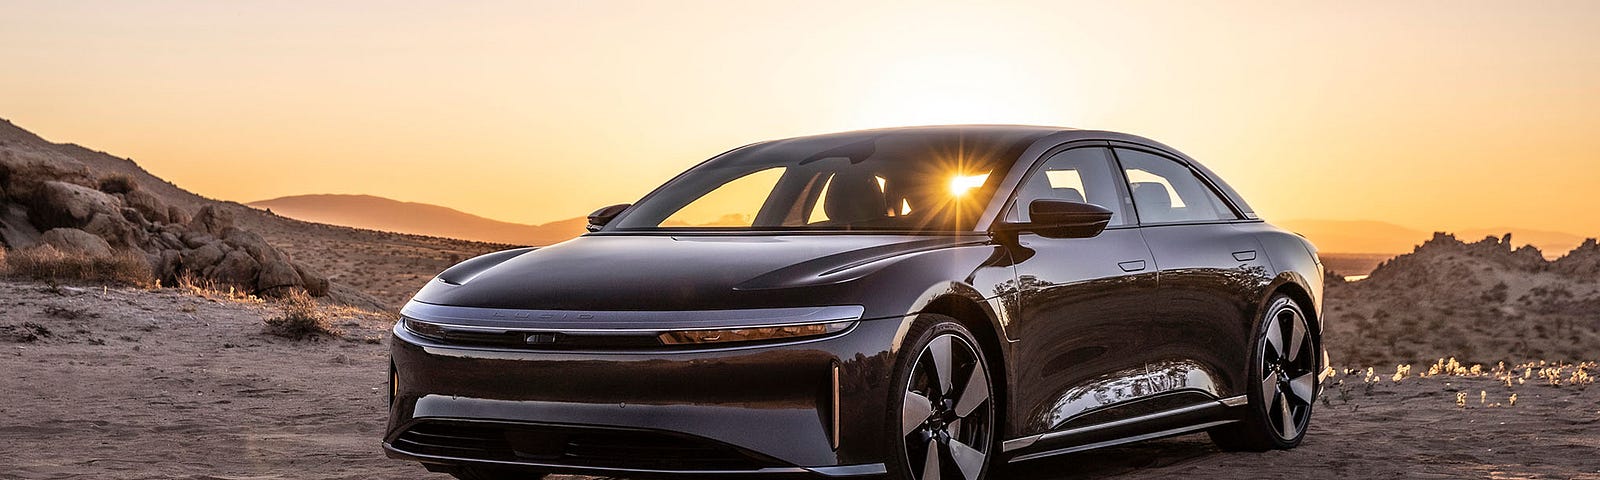 Image of Lucid Air automobile in front of sunset.